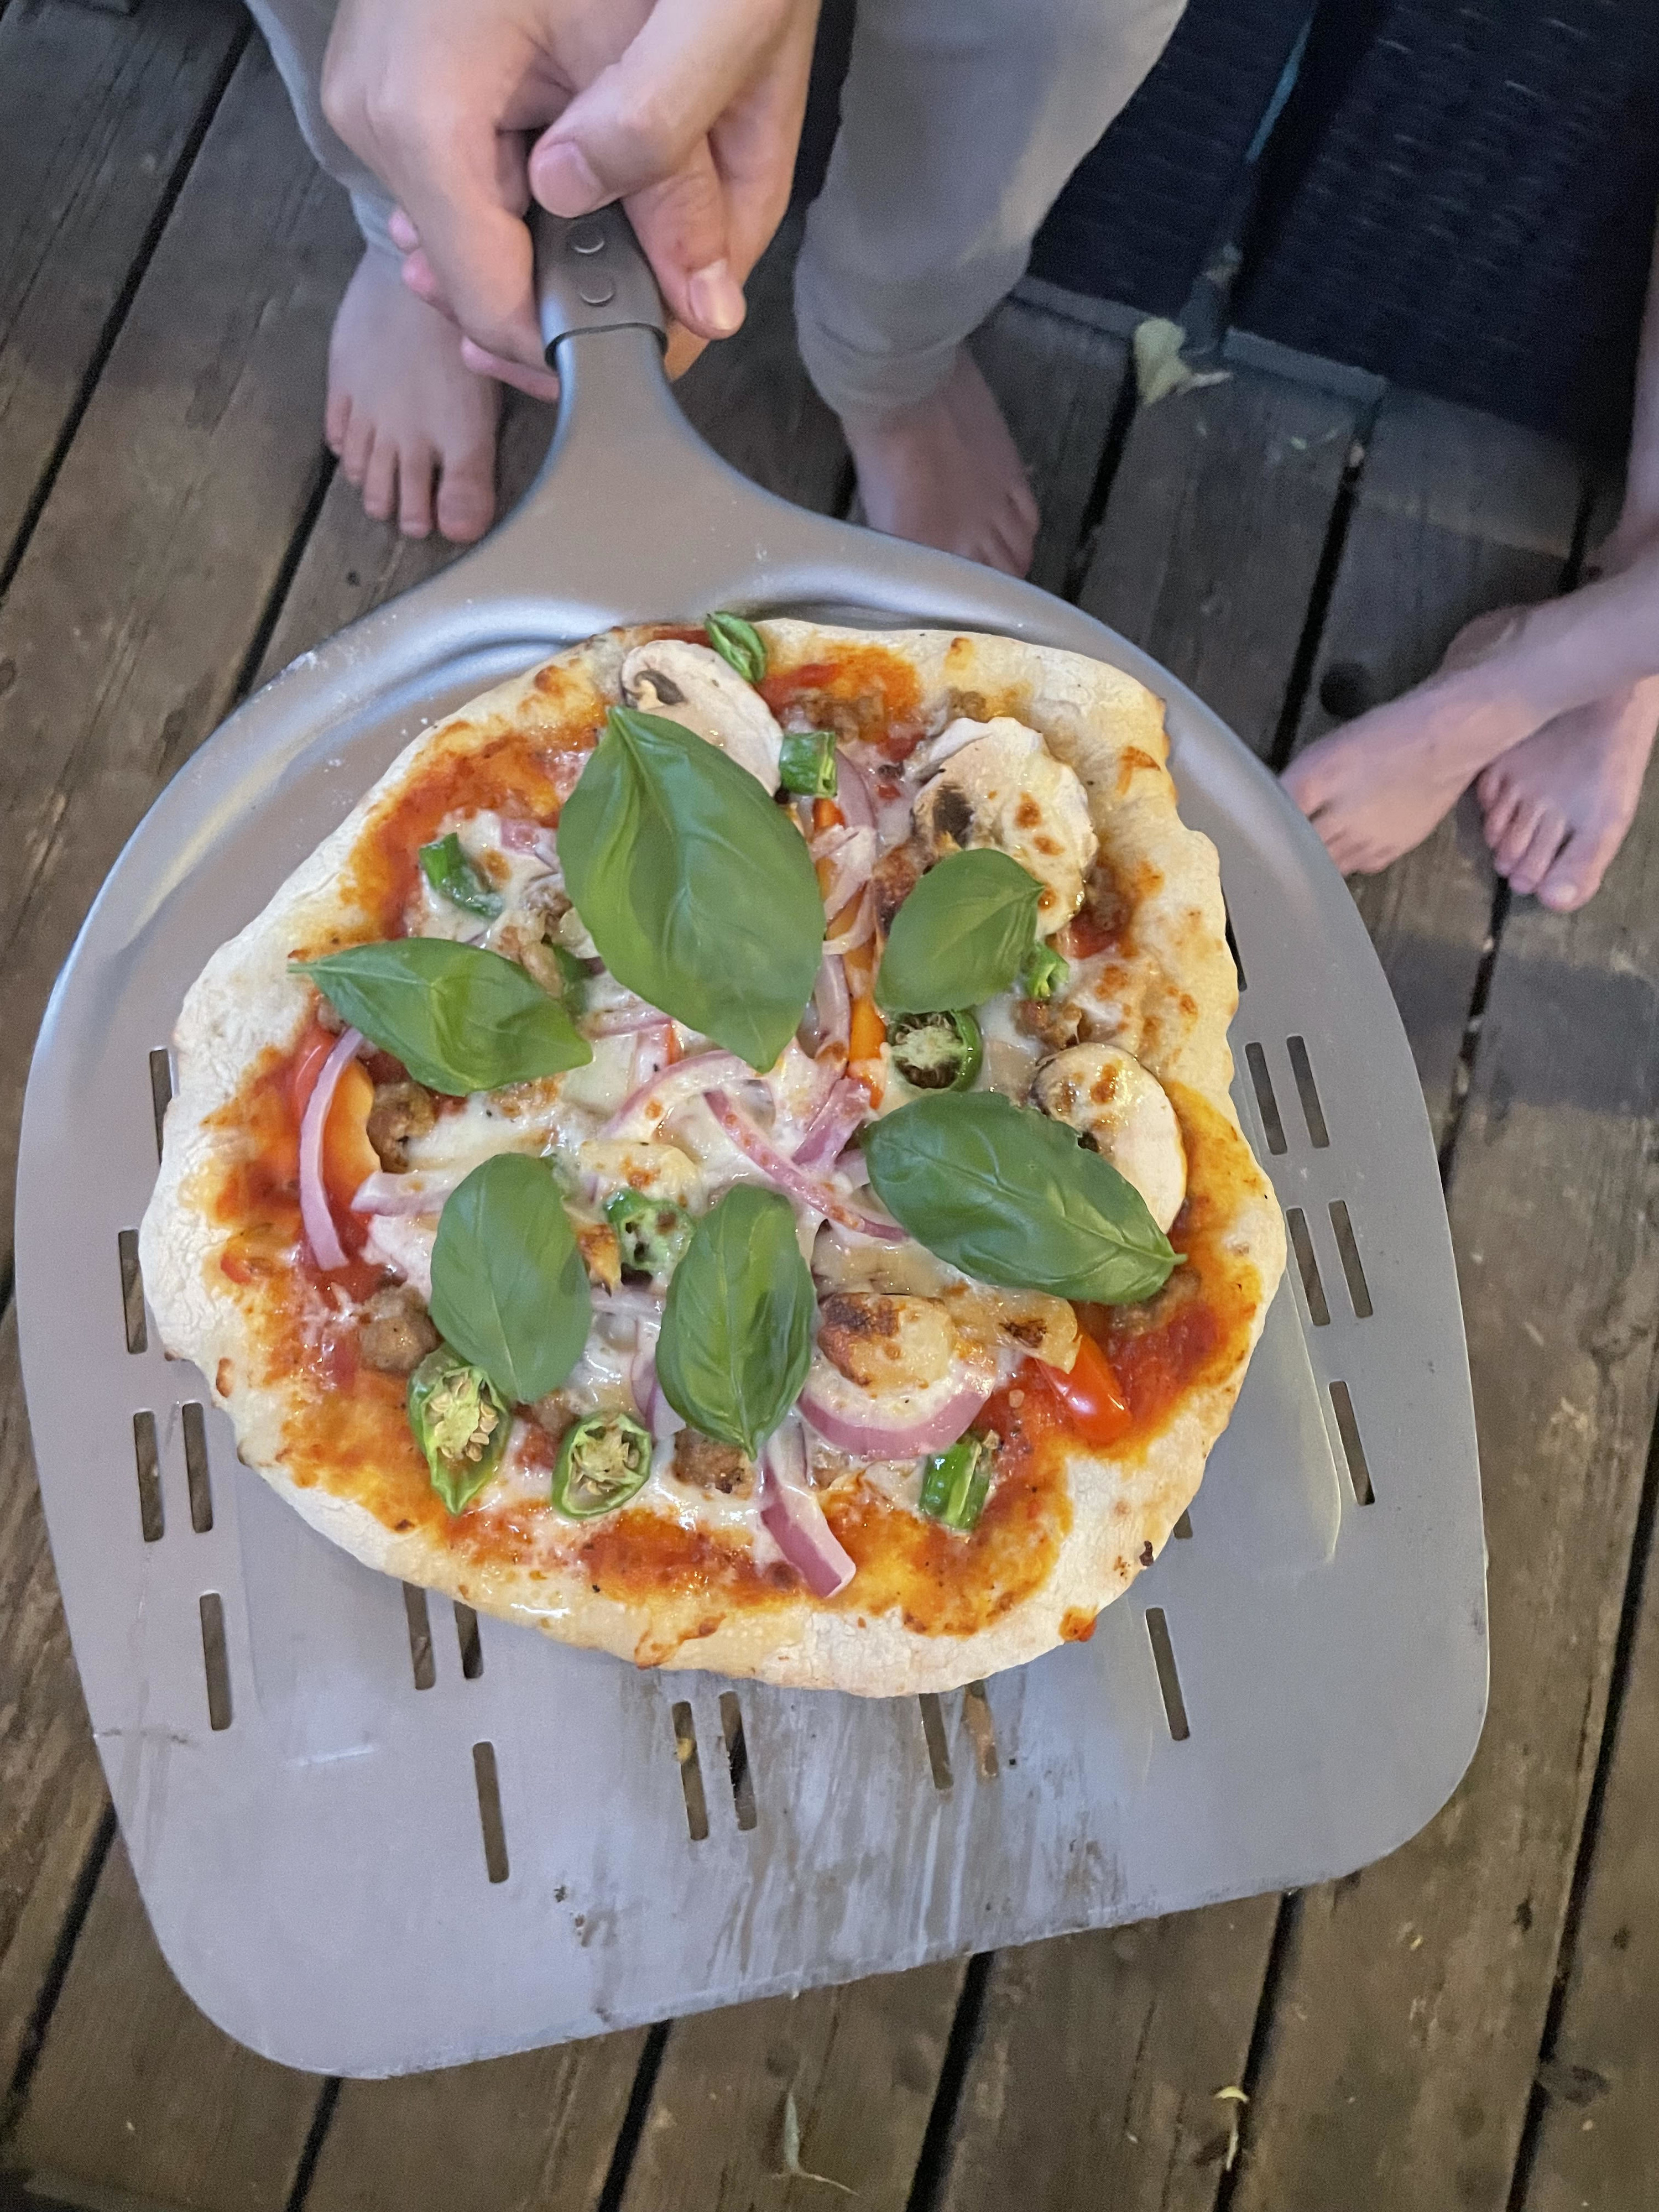 A pizza on the paddle